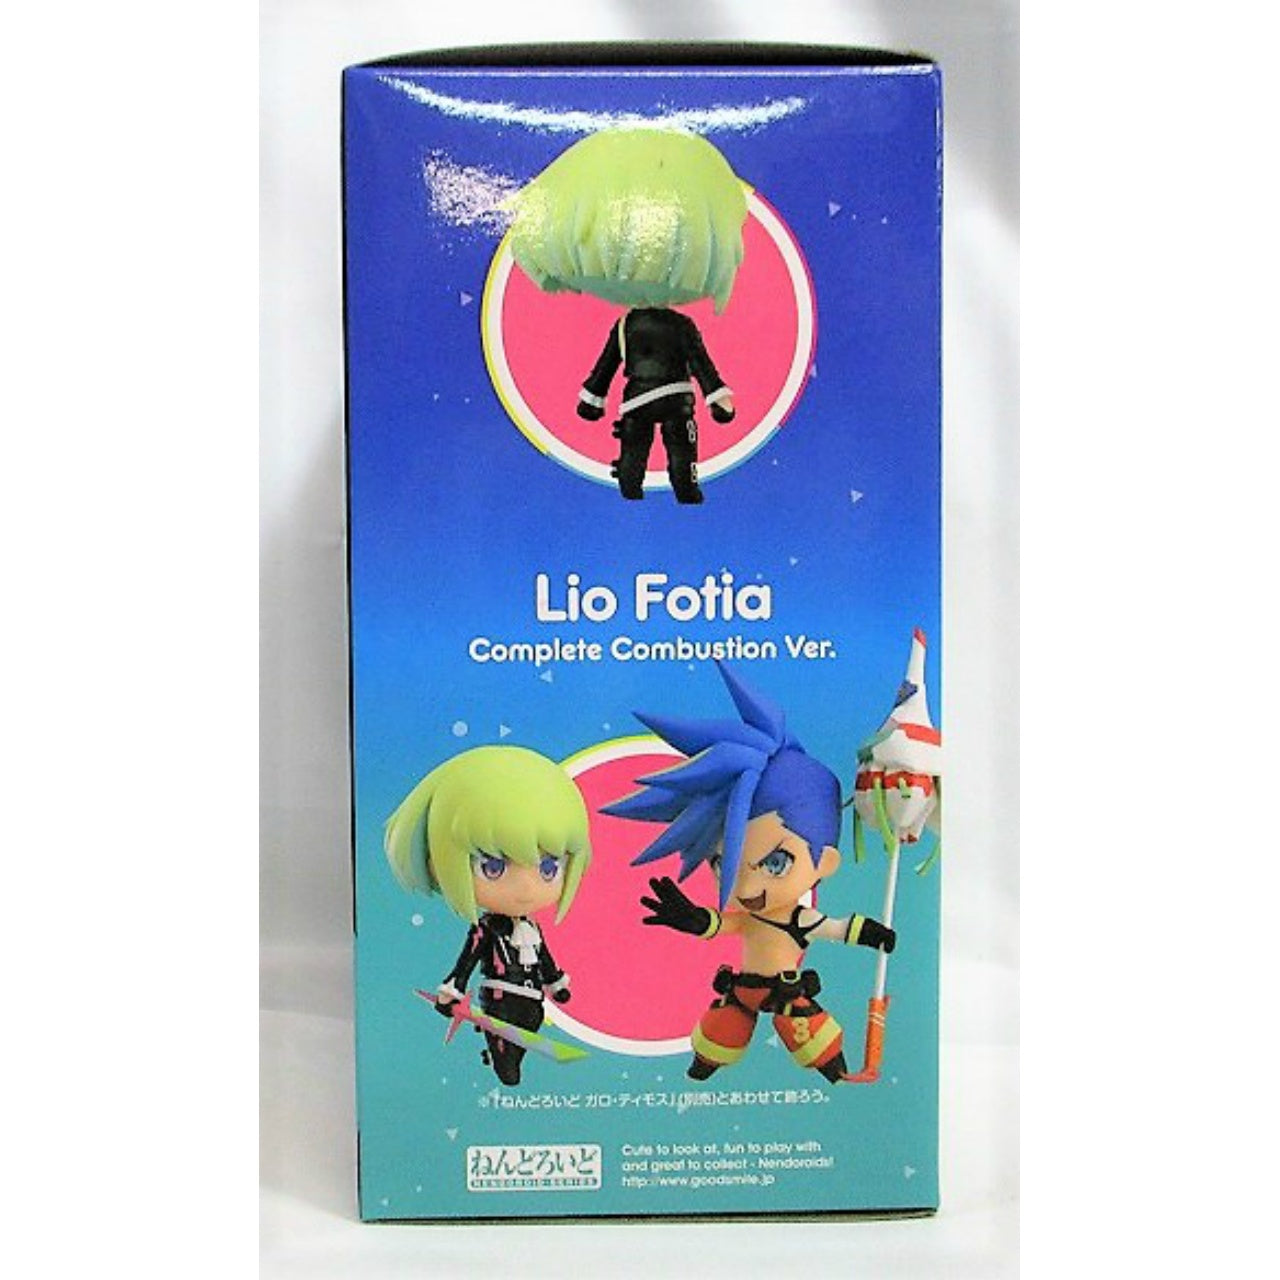 Nendoroid No.1314-DX Lio Fotia: Complete Combustion Ver. with Bonus Item: Flaming Throne Acrylic Background Stand